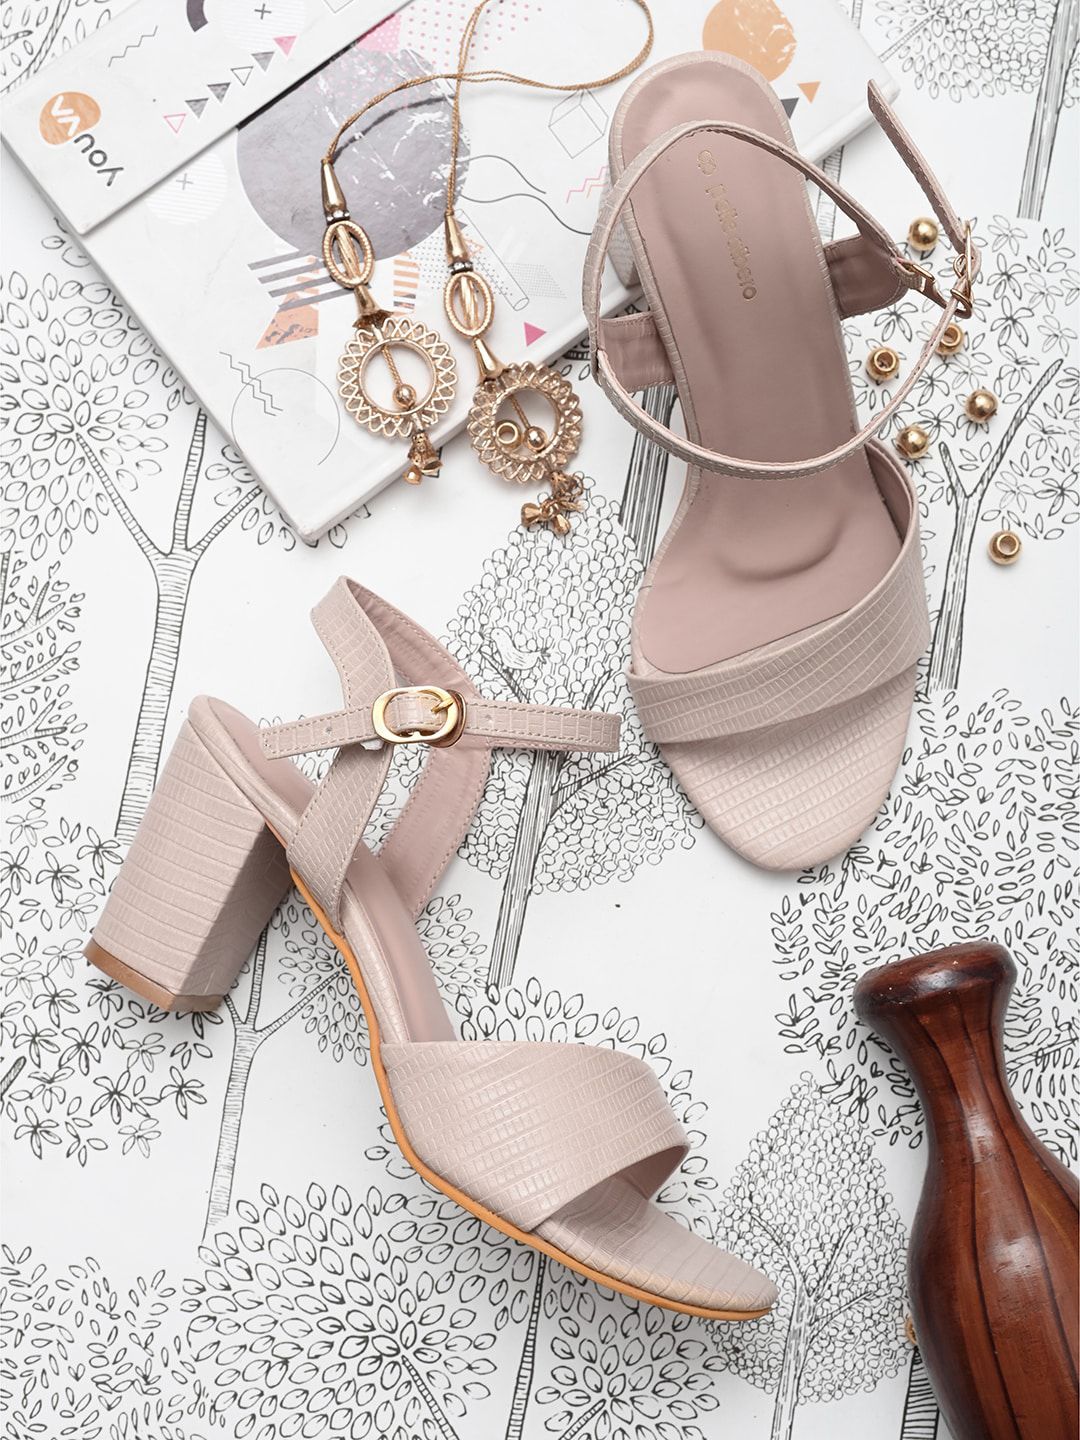 pelle albero Nude-Coloured Block Sandals with Bows Price in India